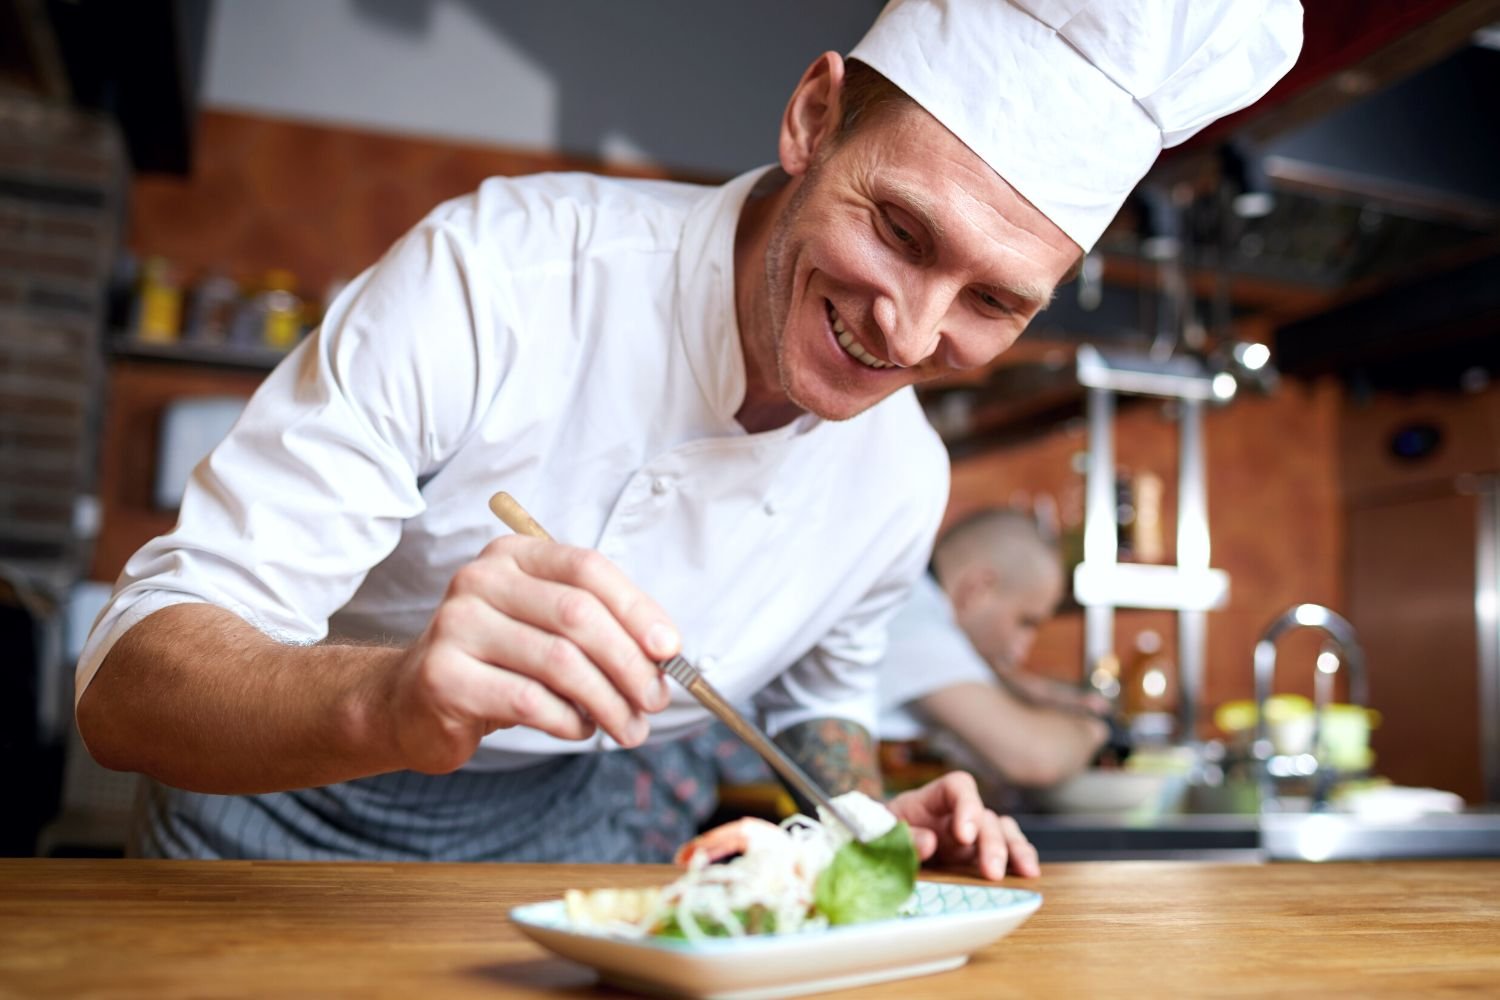 405 Questions to Ask a Chef in an Interview